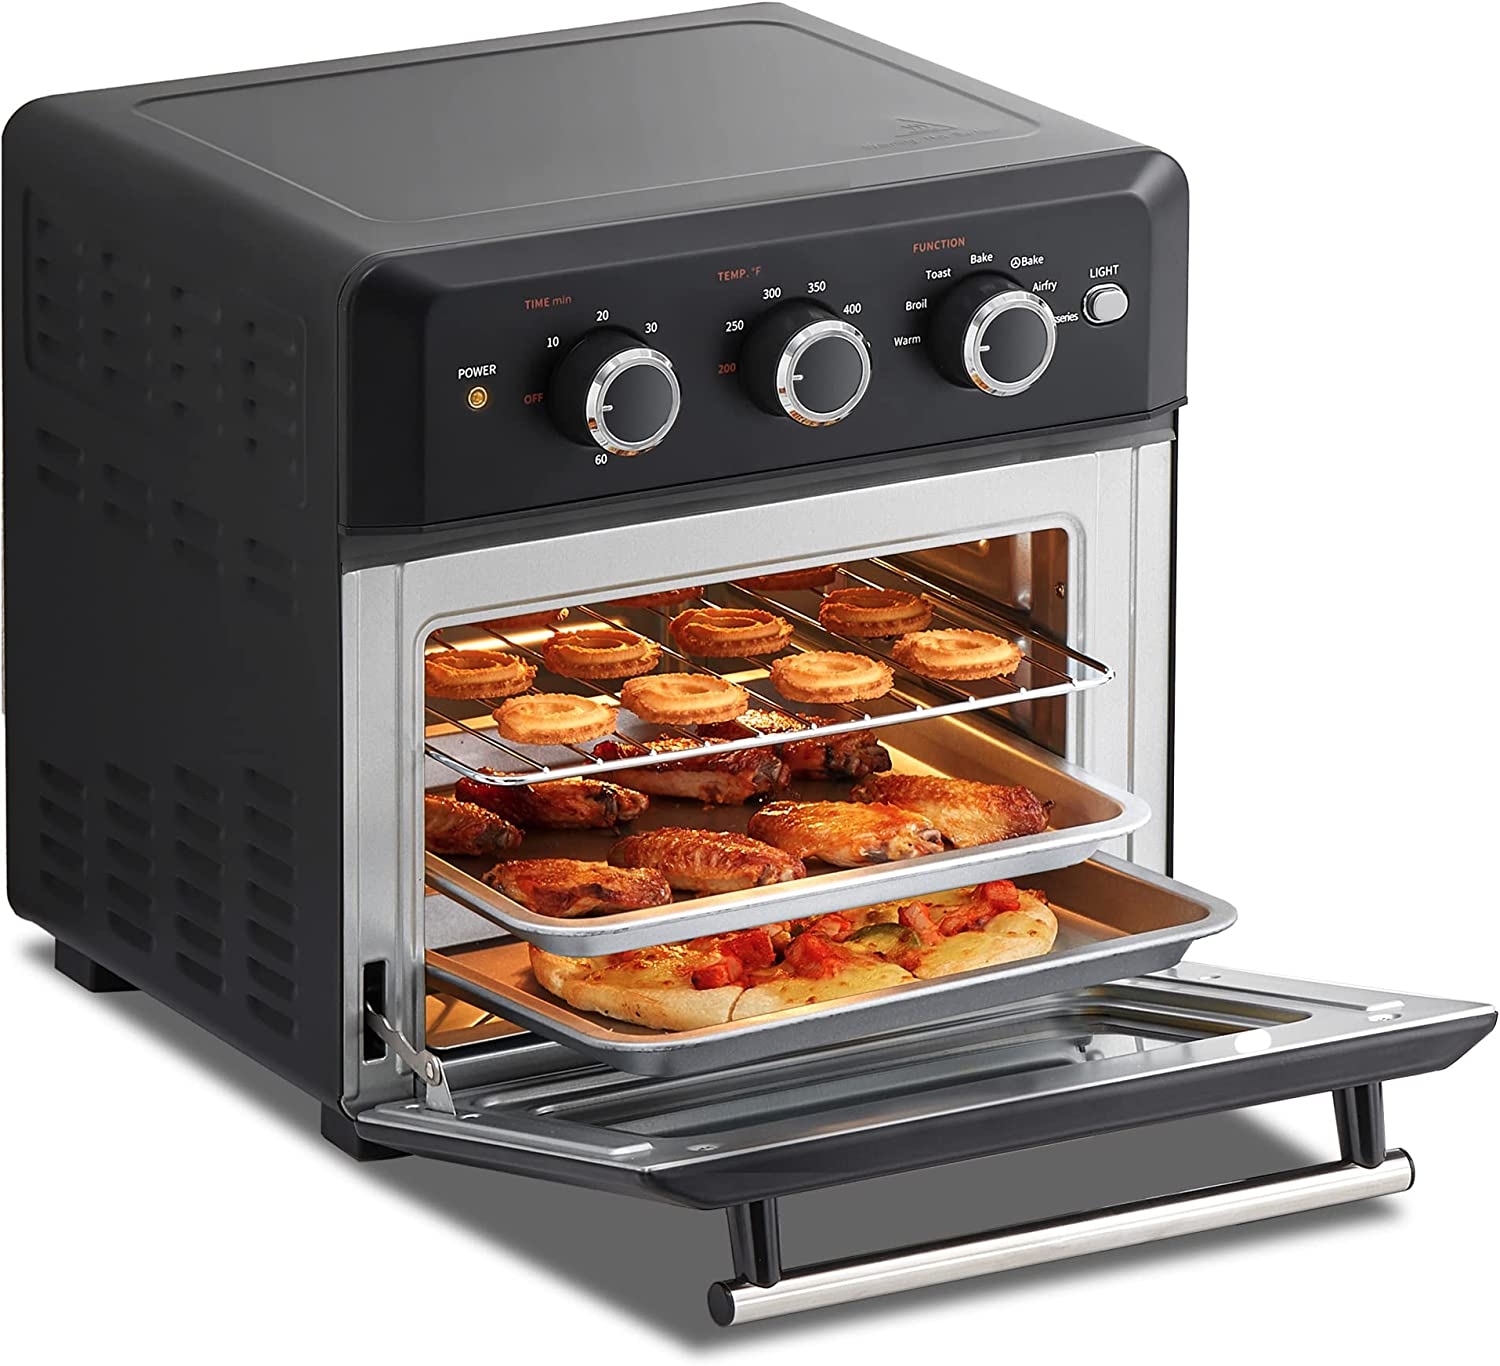 COMFEE’ 4 Slice Small Toaster Oven Countertop, Retro Compact Design, Multi-Function with 30-Minute Timer, Bake, Broil, Toast,